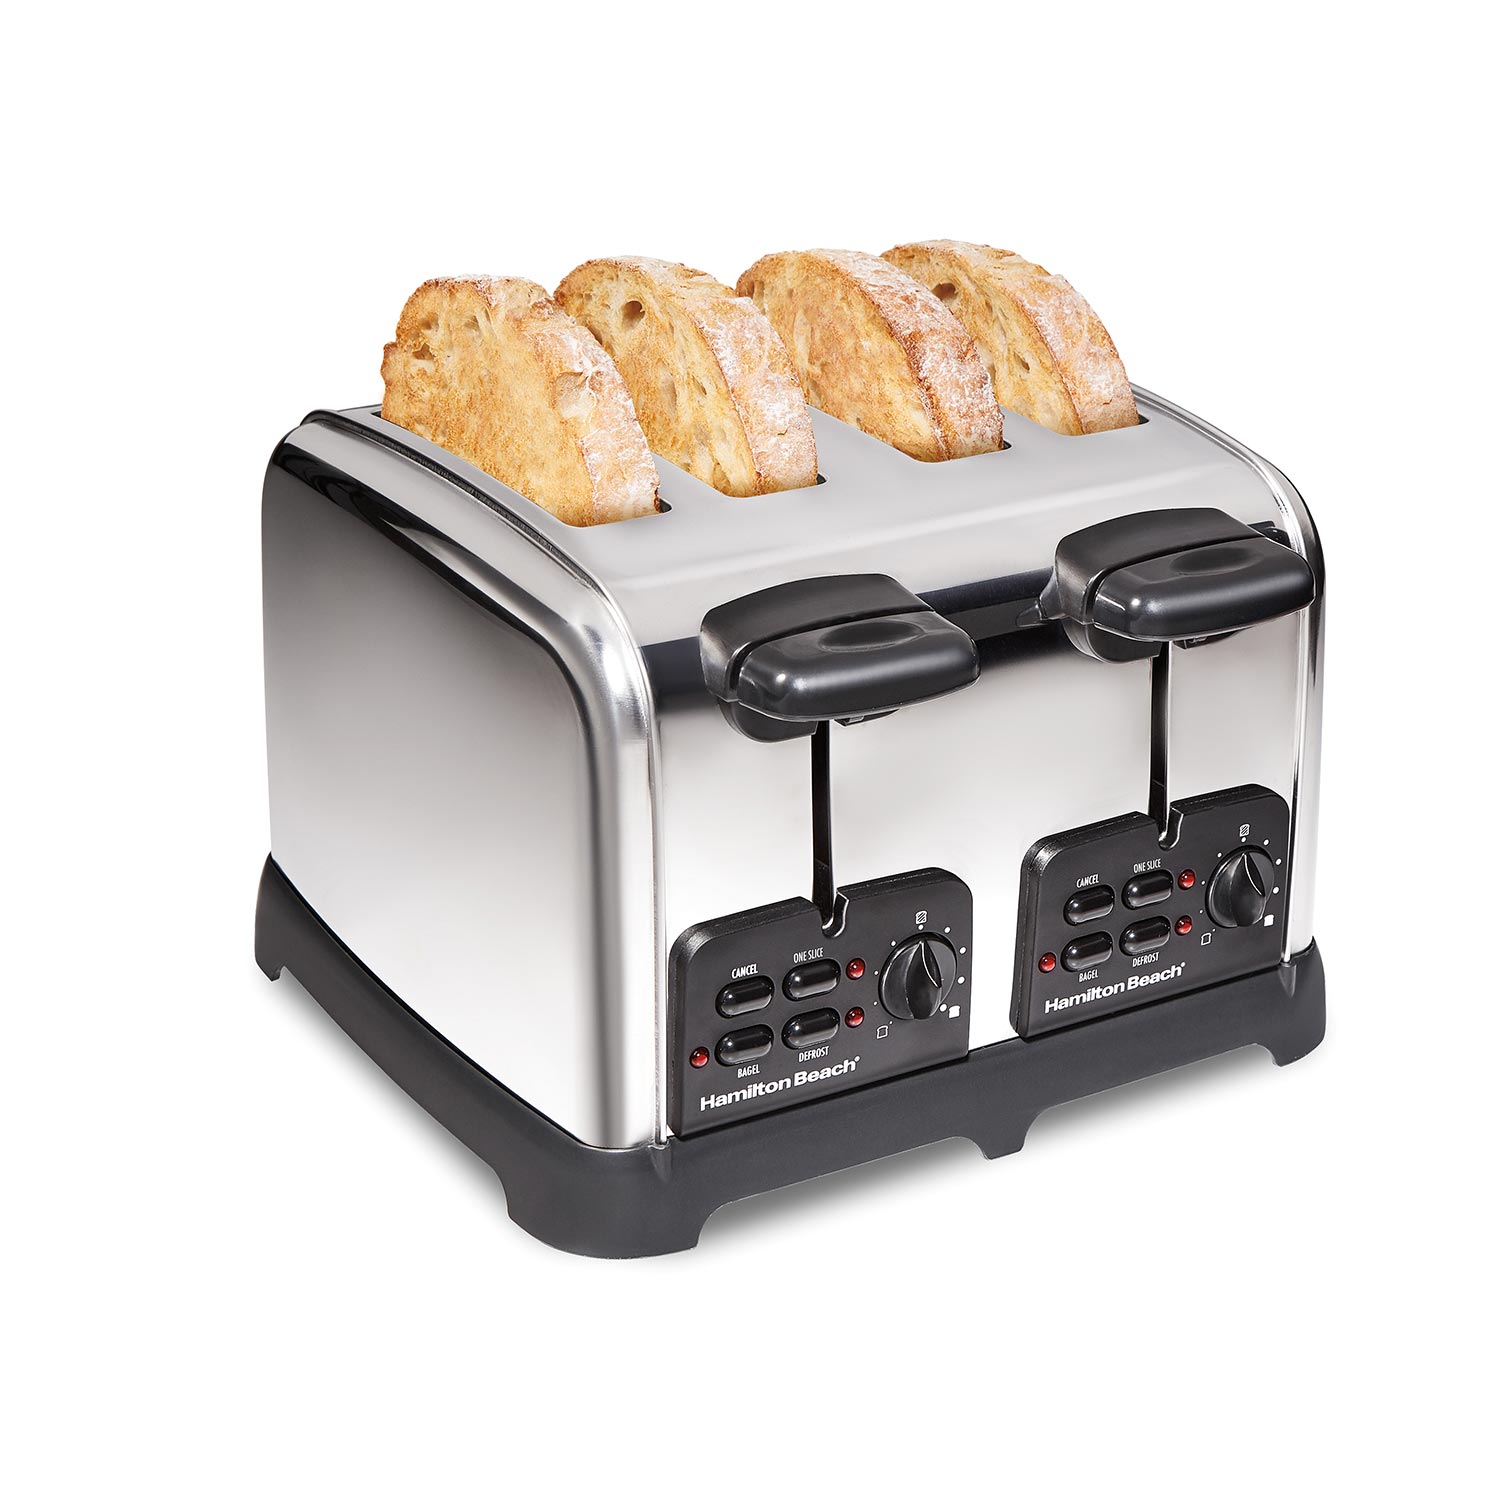 Classic 4 Slice Toaster with Sure-Toast Technology, Stainless Steel (24782G)